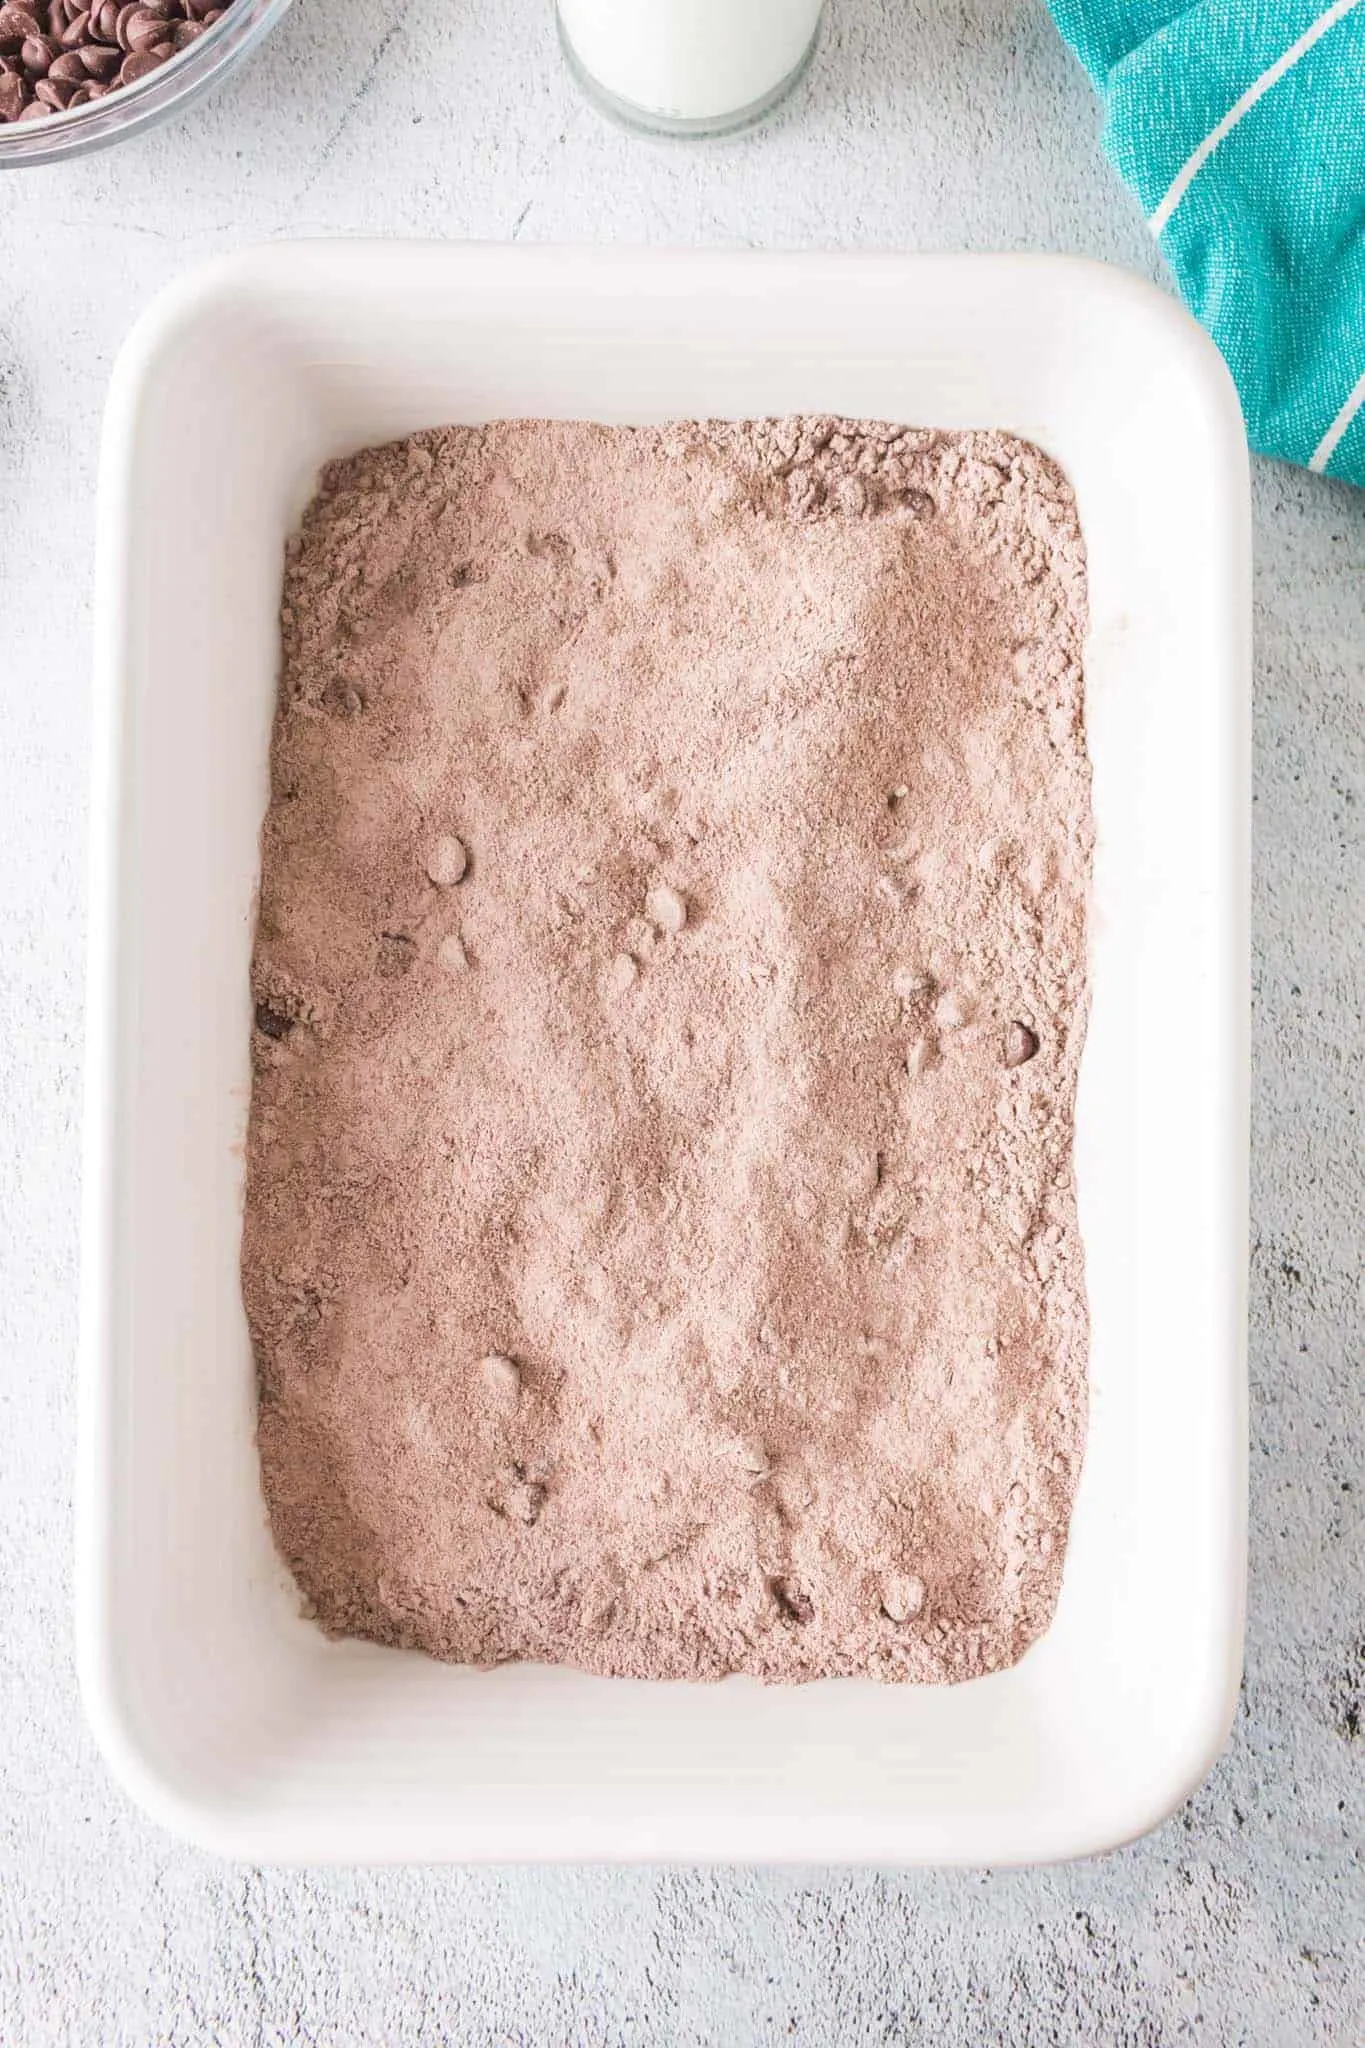 chocolate cake mix, pudding mix and chocolate chips stirred together in a baking dish